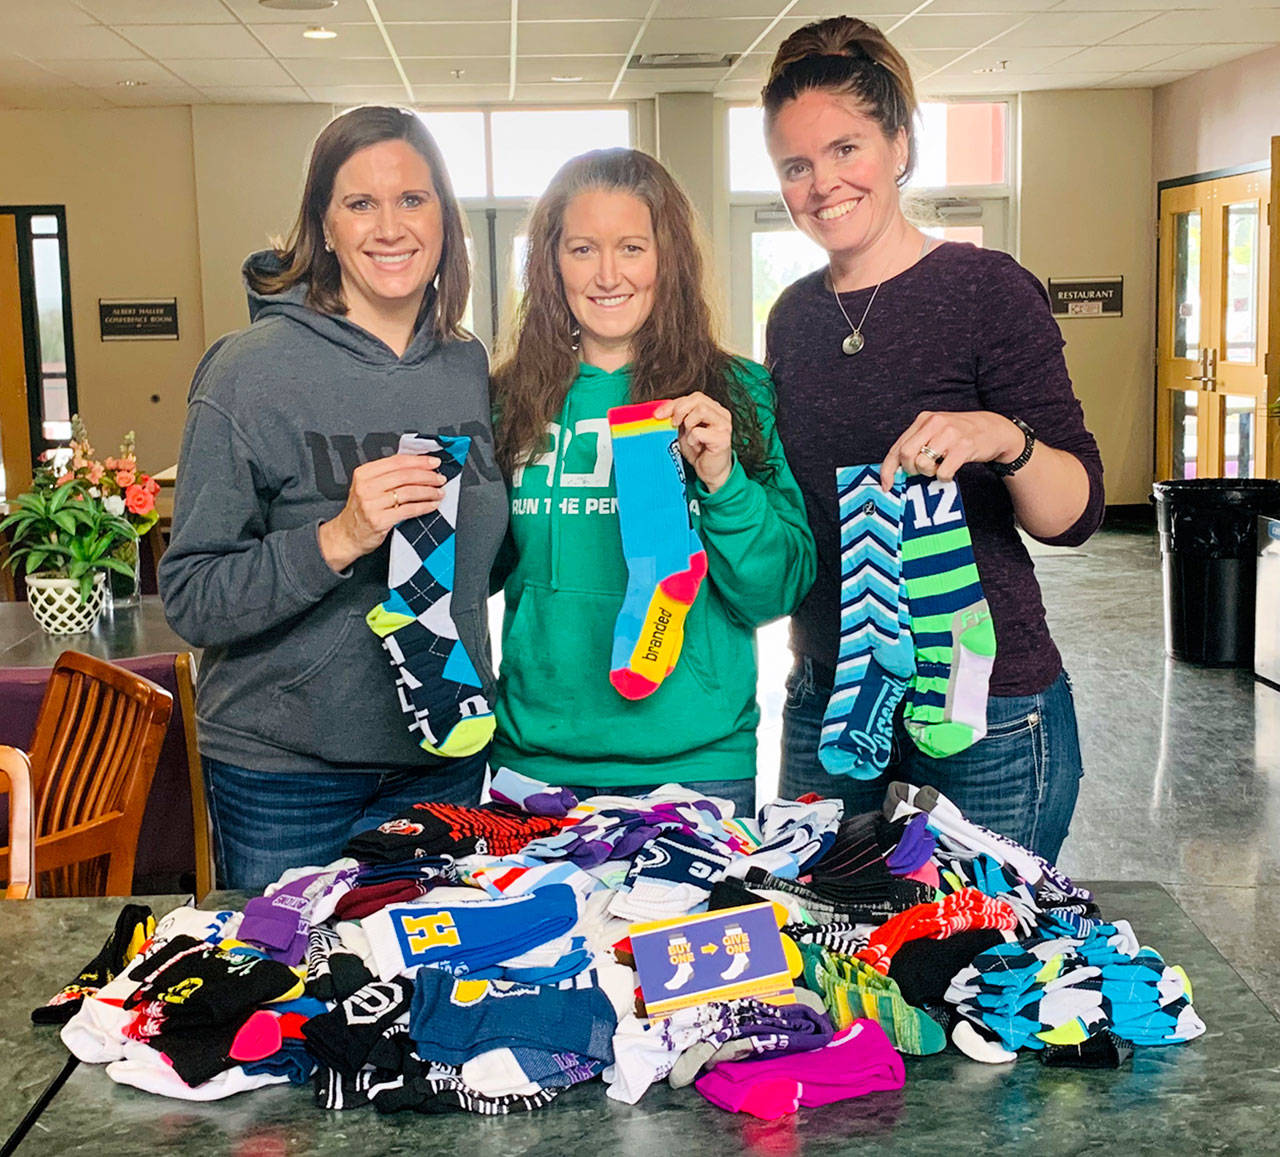 Port Angeles Marathon Association race Director Victoria Jones, center, with Caring for Kids co-founders, Jessica Johnson, right, and Jennifer Riffle, left. The marathon association donated more than $1,000 in socks to Caring for Kids.